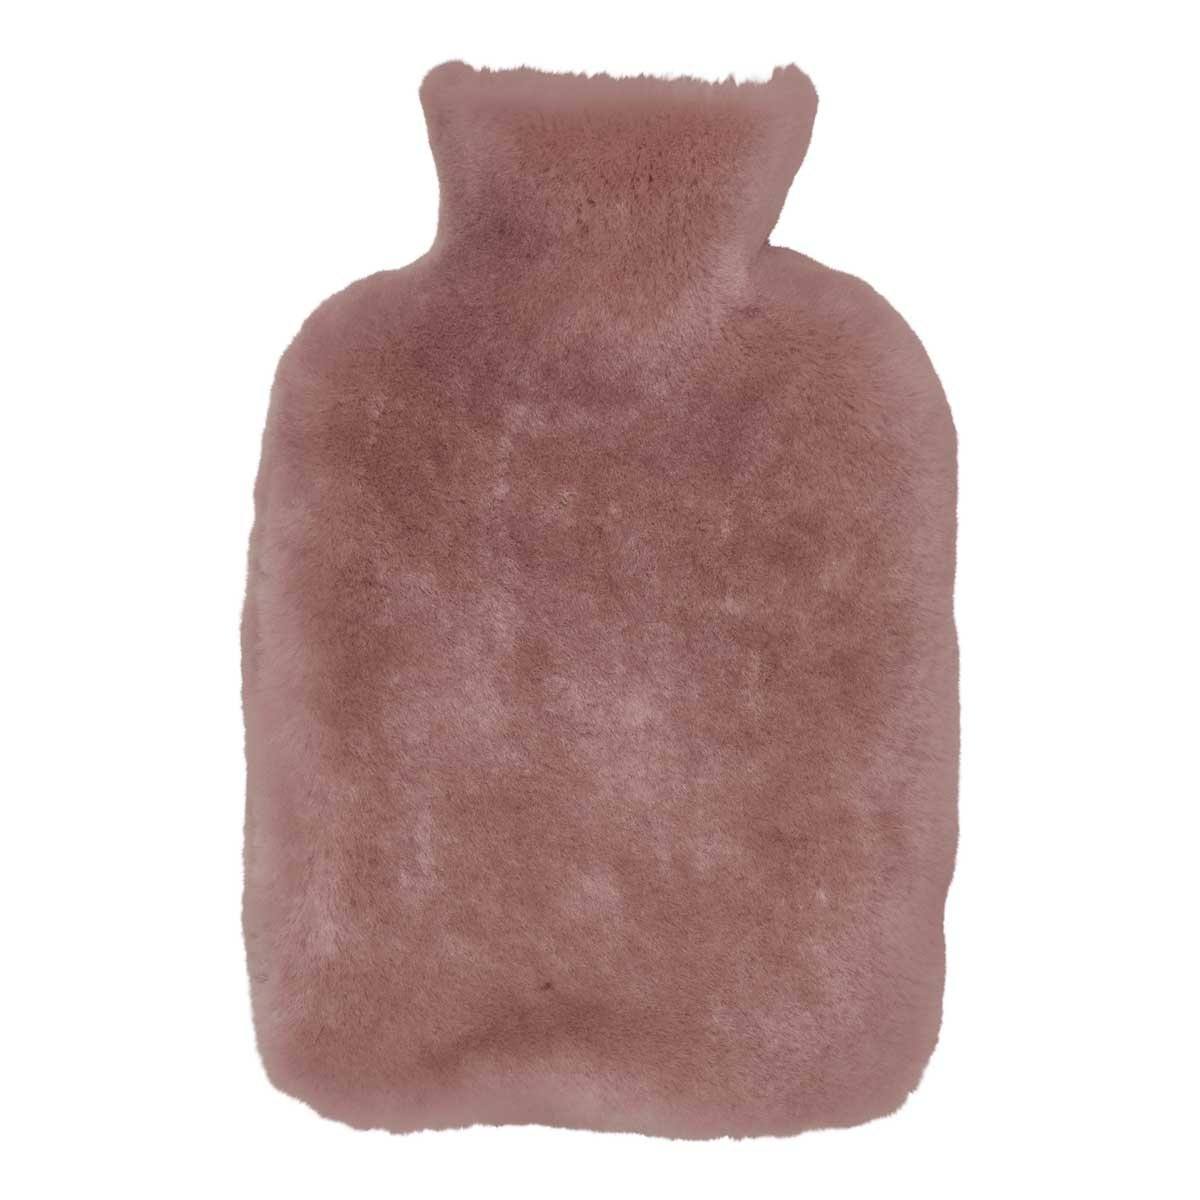 Premium Quality, New Zealand, Hot water bottle 12mm Moccasin, 32x22 cm